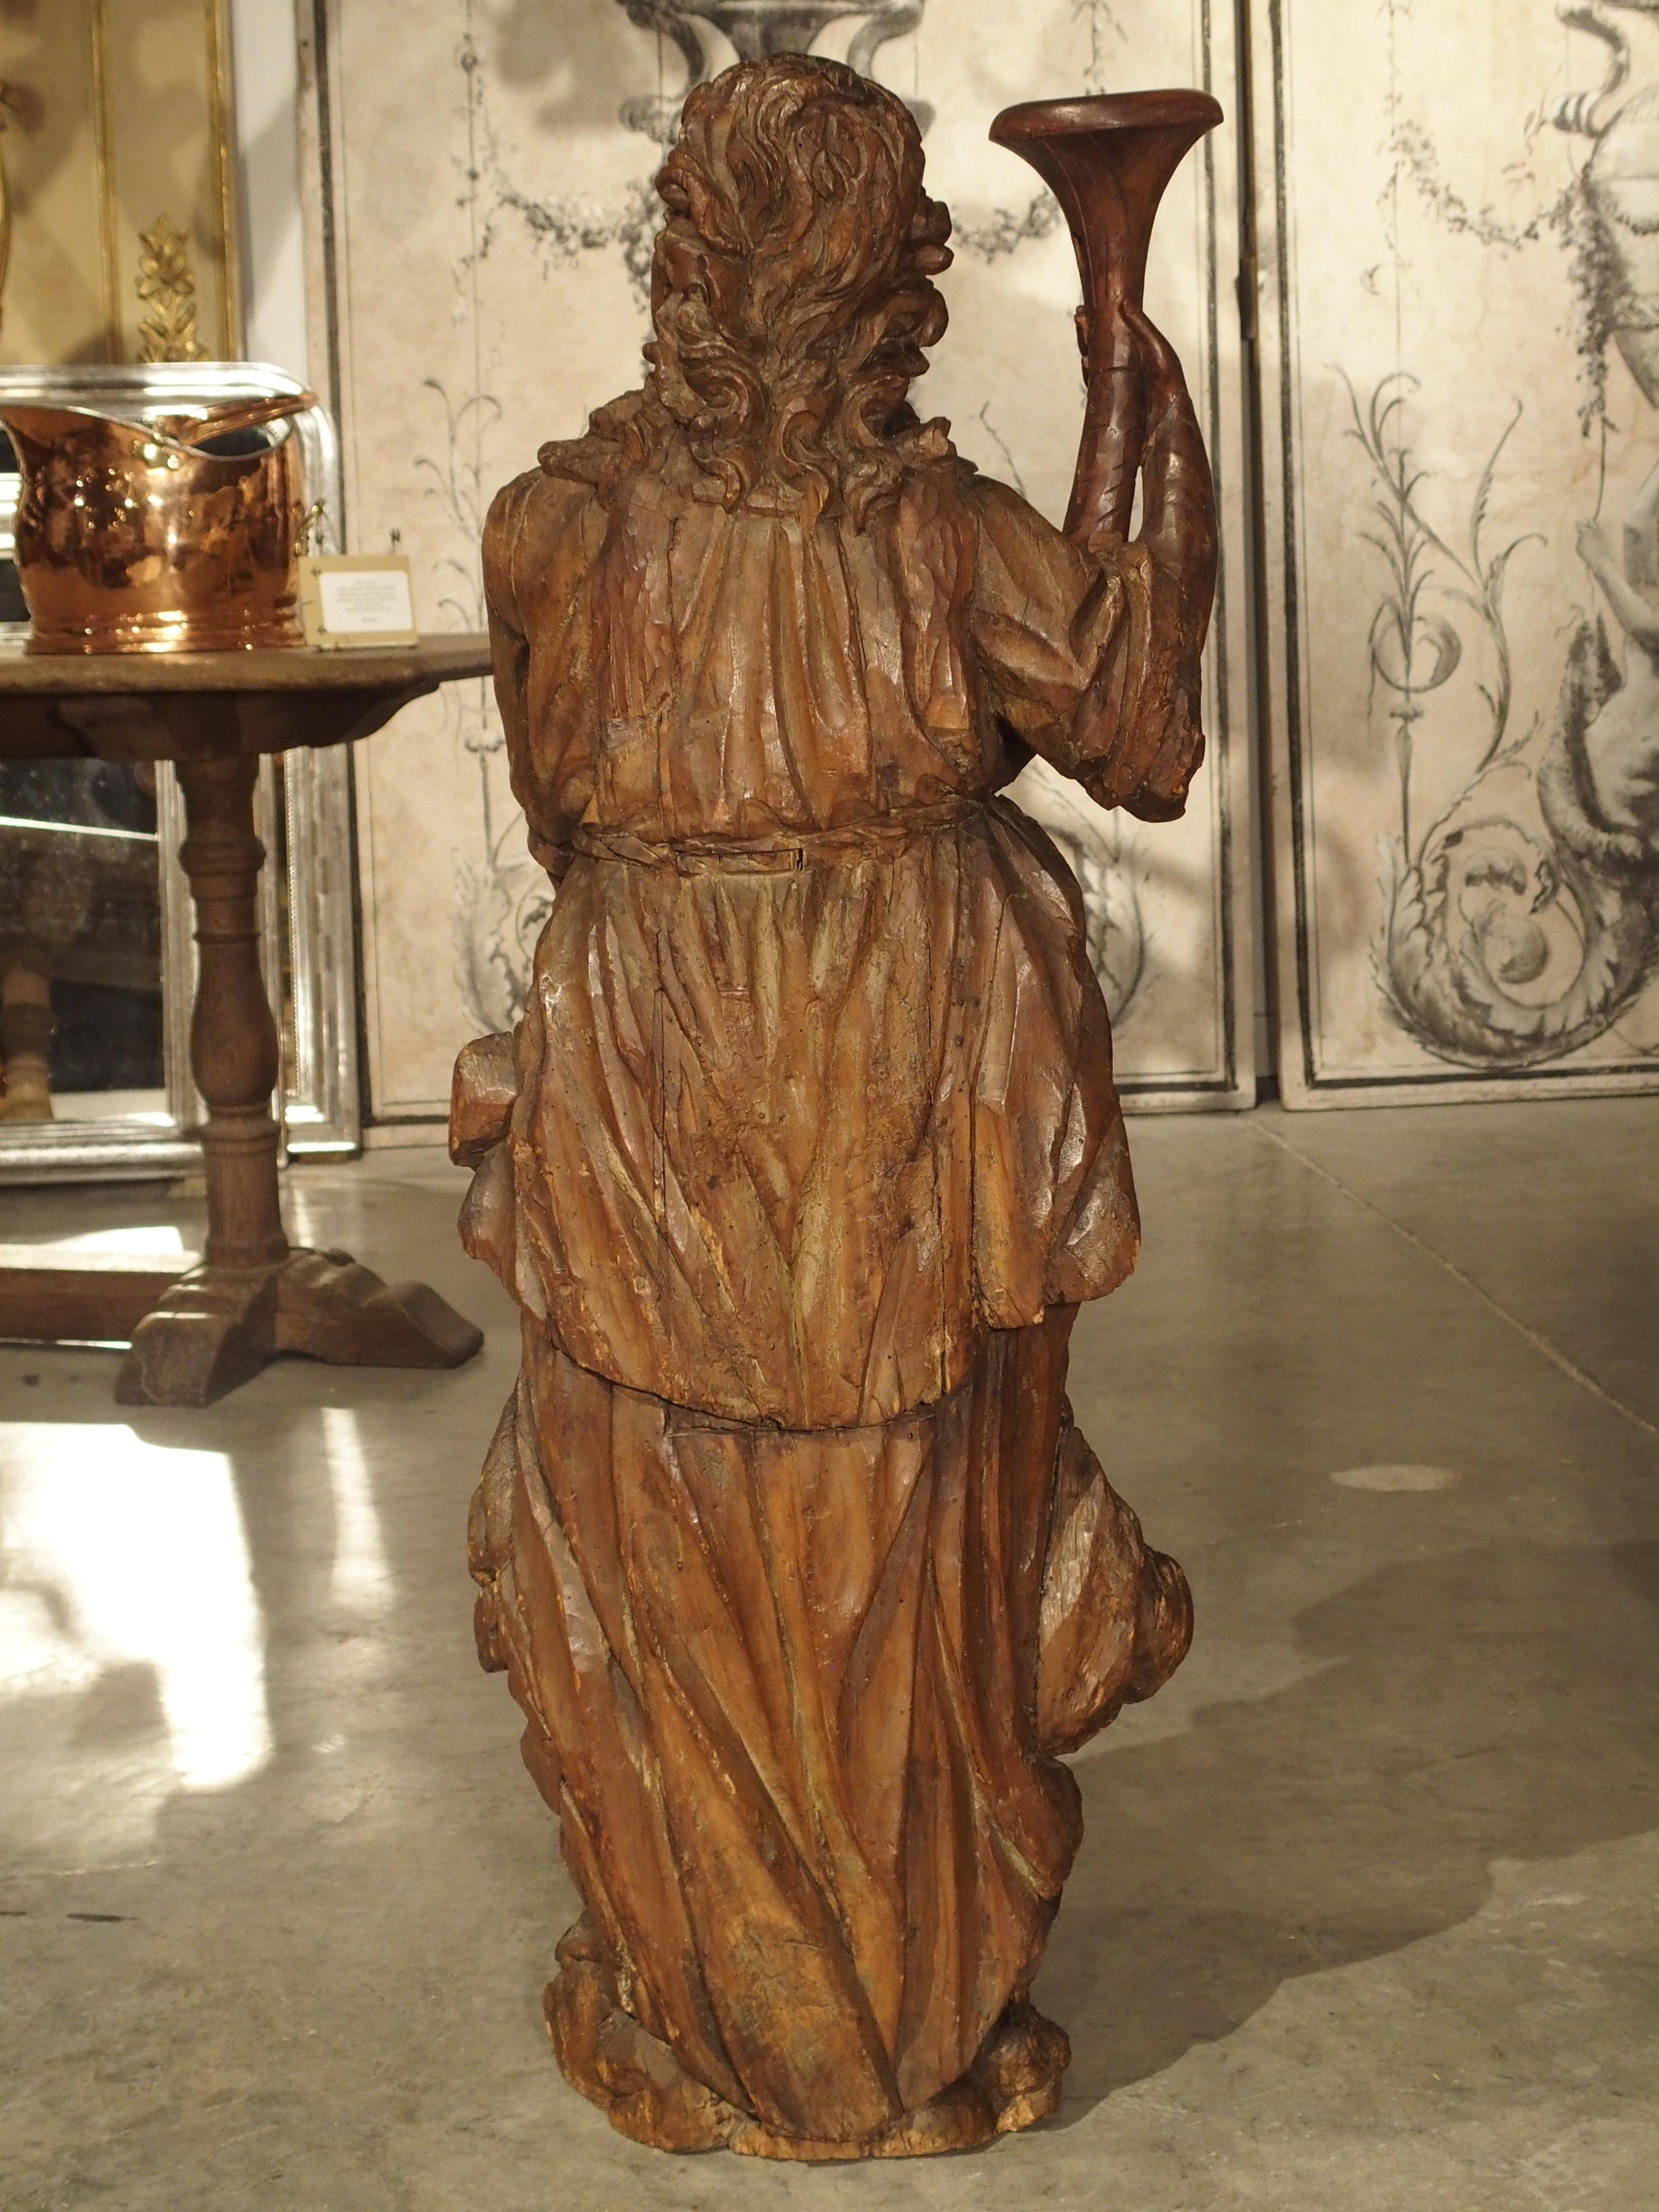 Circa 1650 Carved Hardwood Cornucopia Statue and Candle Holder from Italy For Sale 5